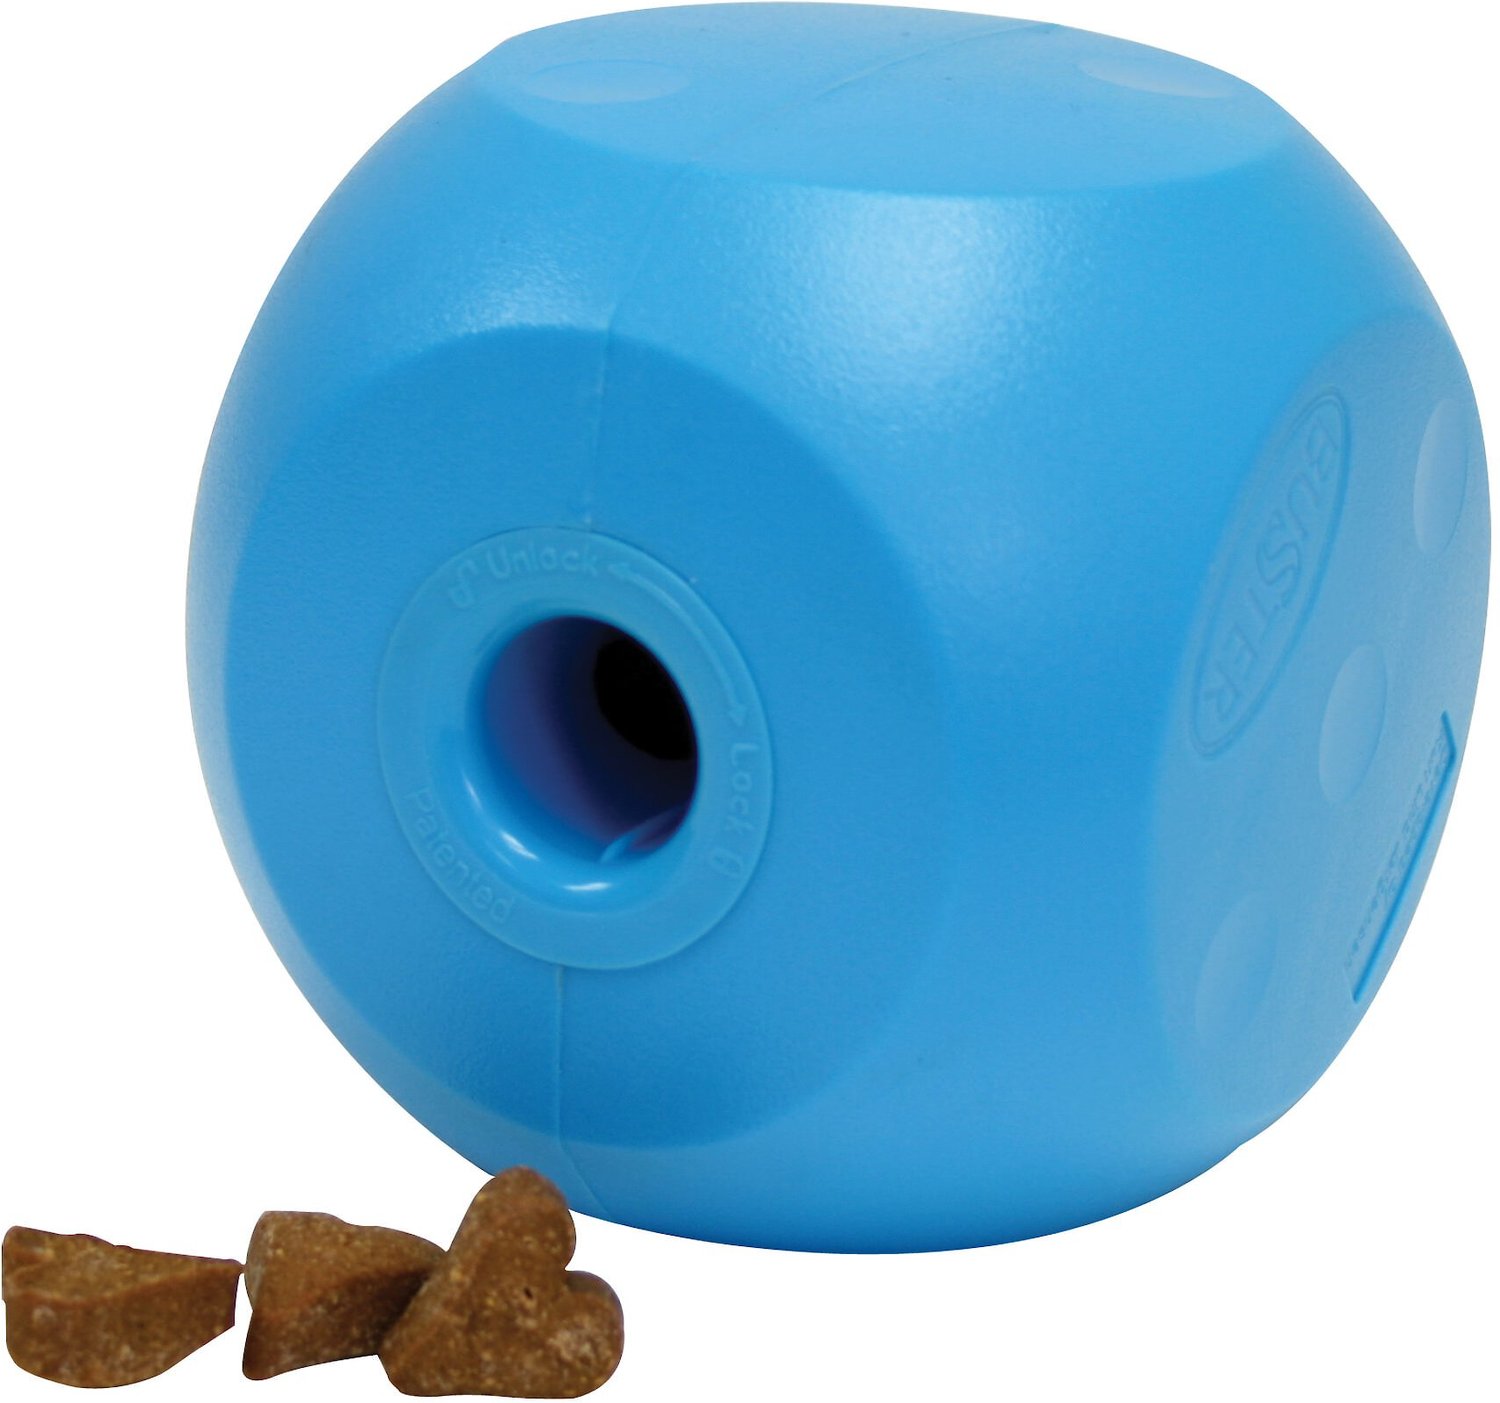 buster cube dog toy